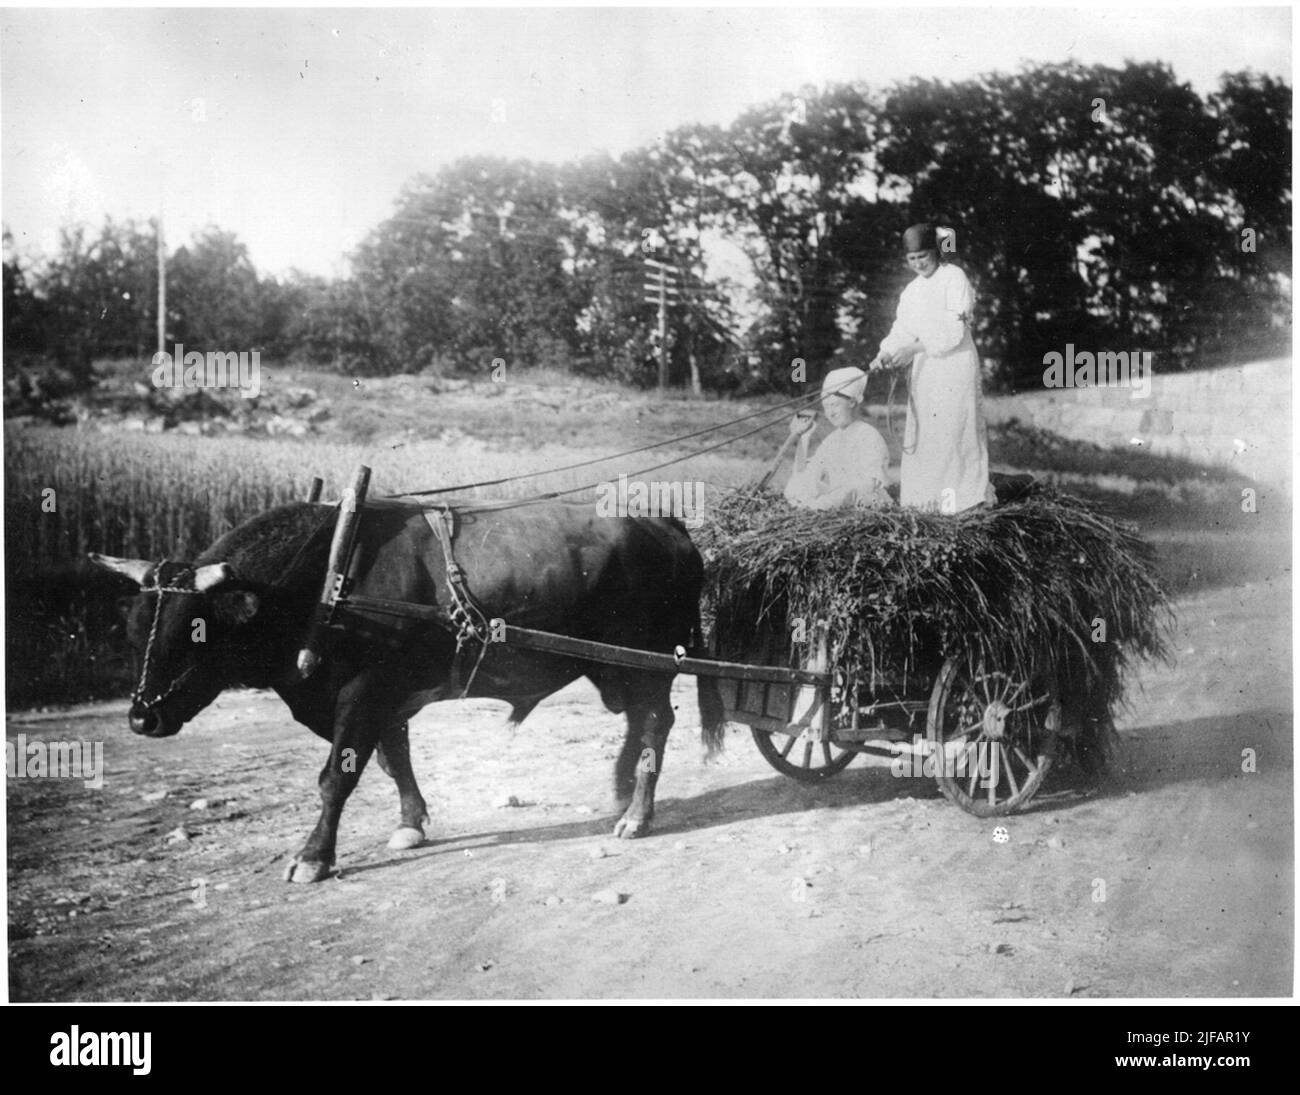 Two women from the Red Star in the two -wheeled hay -scraped features of bull on country road. Two women from the Red Star in the two -wheeled hay -scraped features of bull on country road. The picture is included in the Army Museum's image suite showing Swedish Red Star/Swedish Blue Star's operations. Already at the end of 1914, in Switzerland, an international covenant of associations for assistance to the animals on the battlefields had been formed, called the L Etoile rouge-red star. In Sweden, the Committee for female preparedness in 1917 invited representatives from interested authoritie Stock Photo